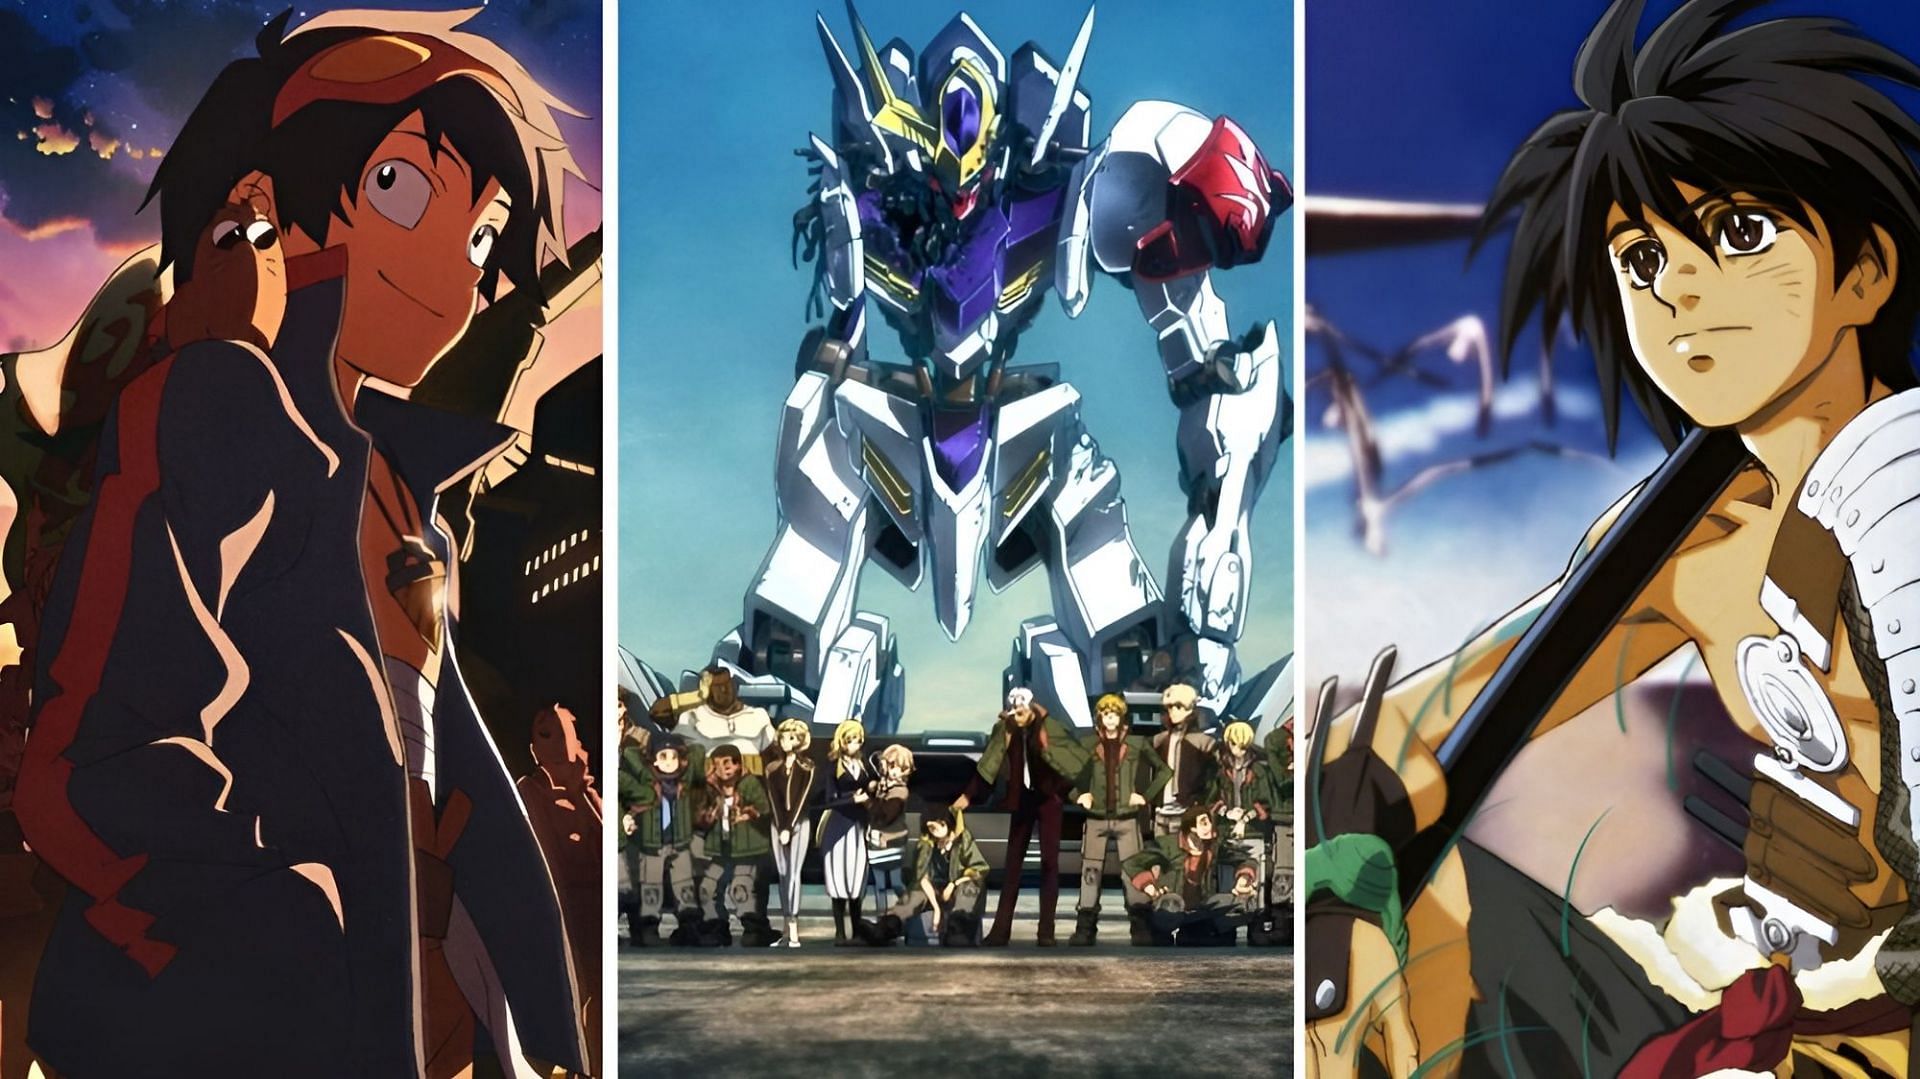 What is your favorite mecha anime? What do you like about them? - Quora